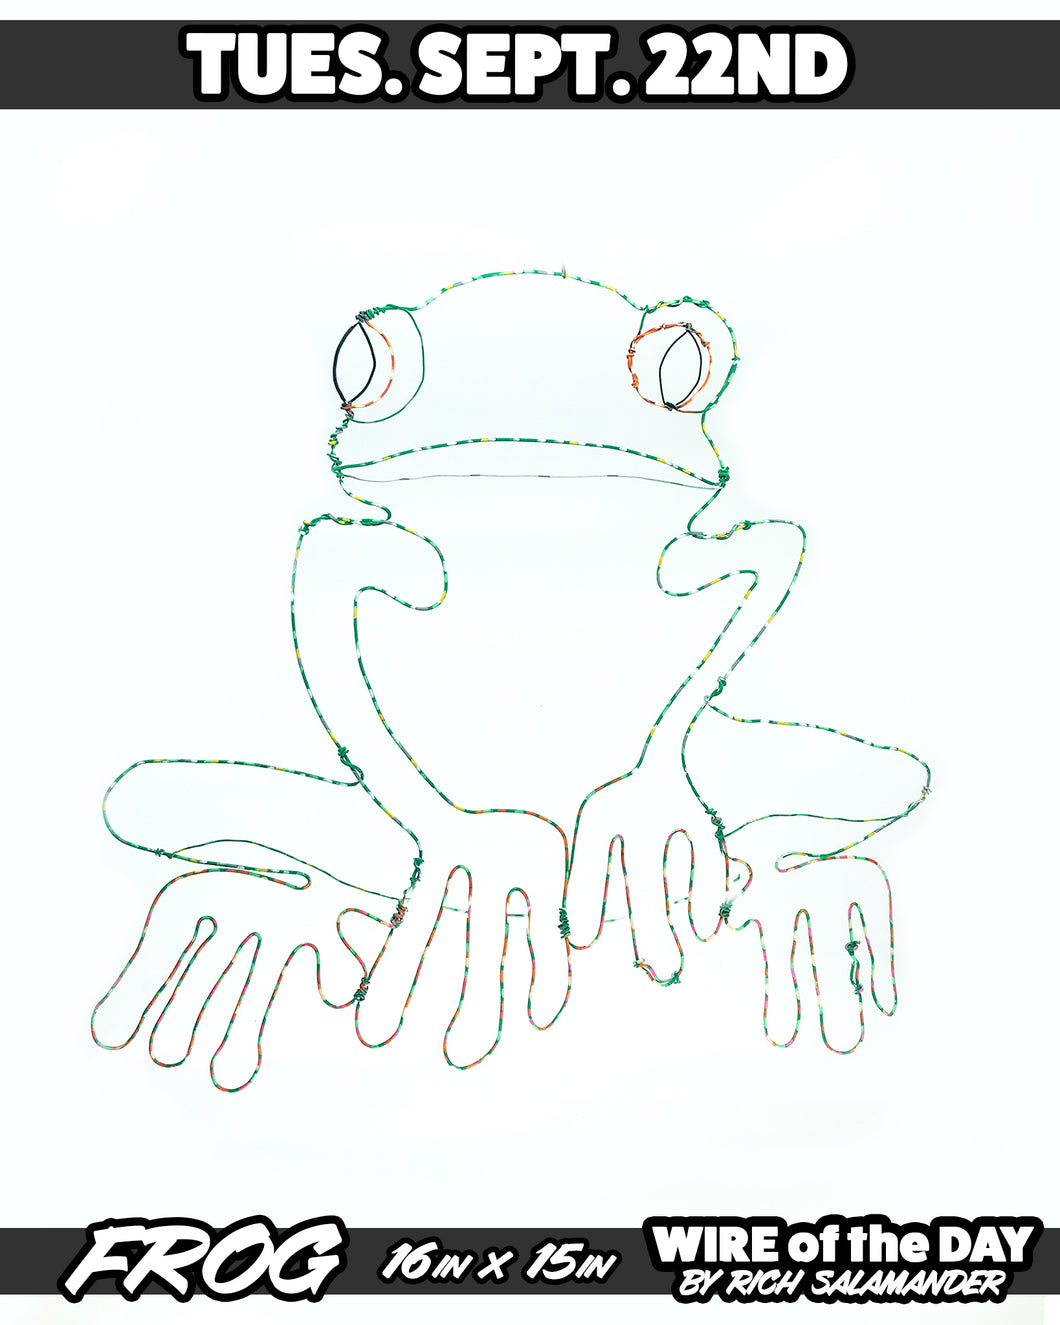 WIRE of the DAY FROG